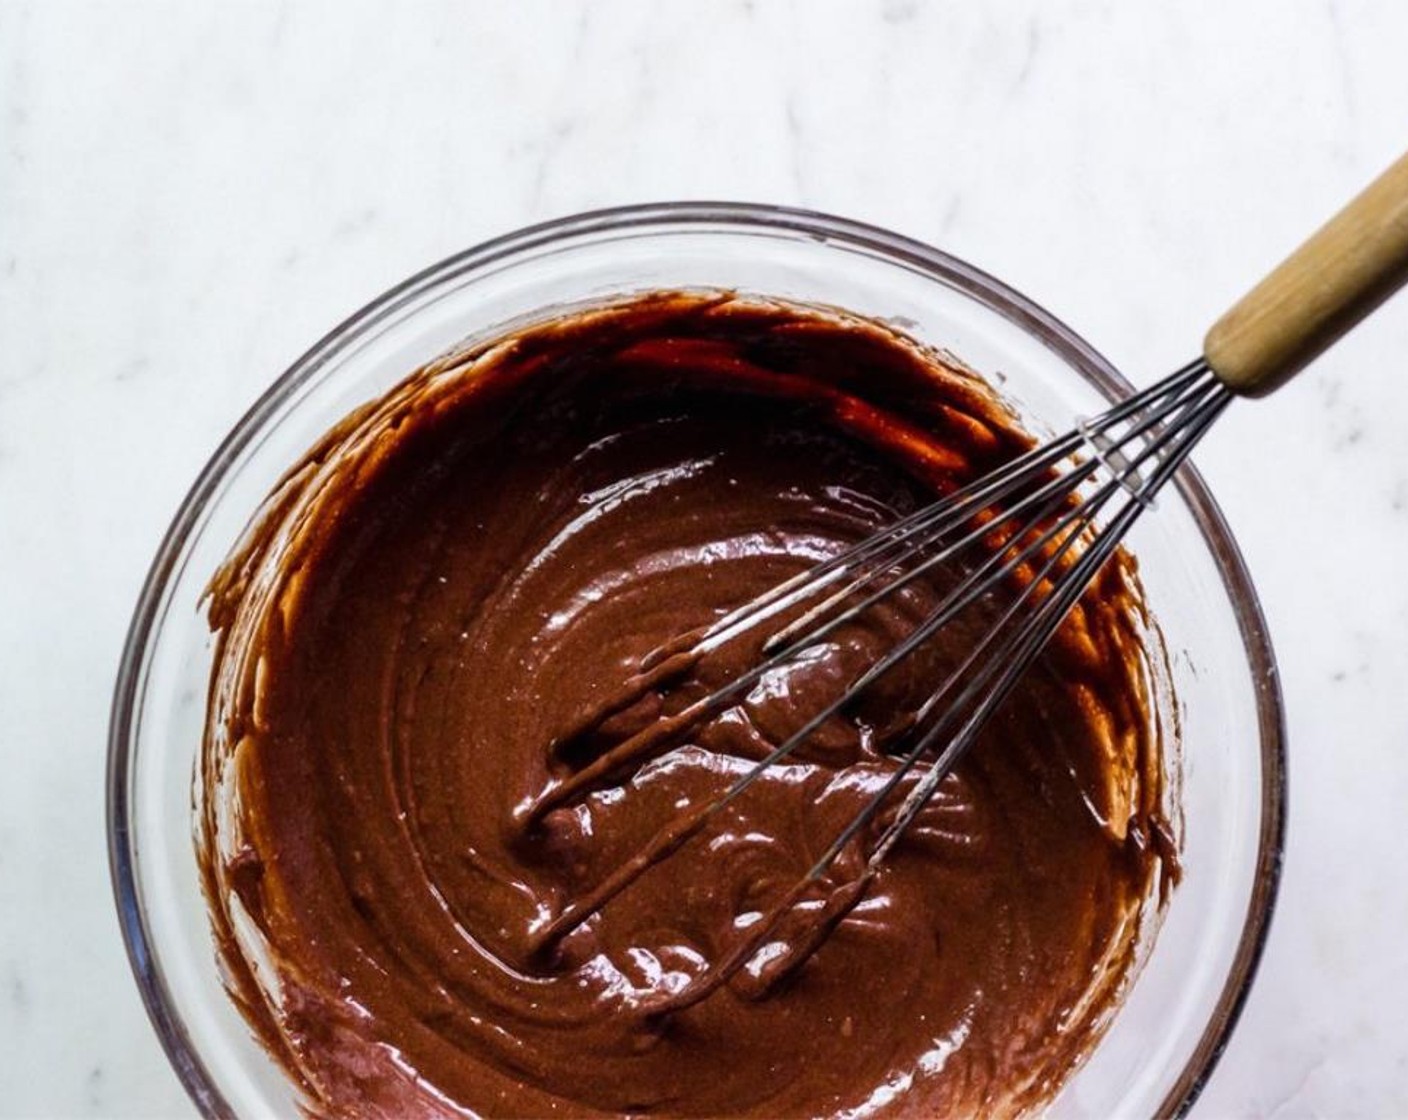 step 4 In a medium saucepan, melt Unsalted Butter (1/3 cup) over medium heat. Turn heat to low, add Semi-Sweet Baking Chocolate (1 cup) and stir until just melted. Remove from heat and whisk in the Granulated Sugar (1/2 cup).